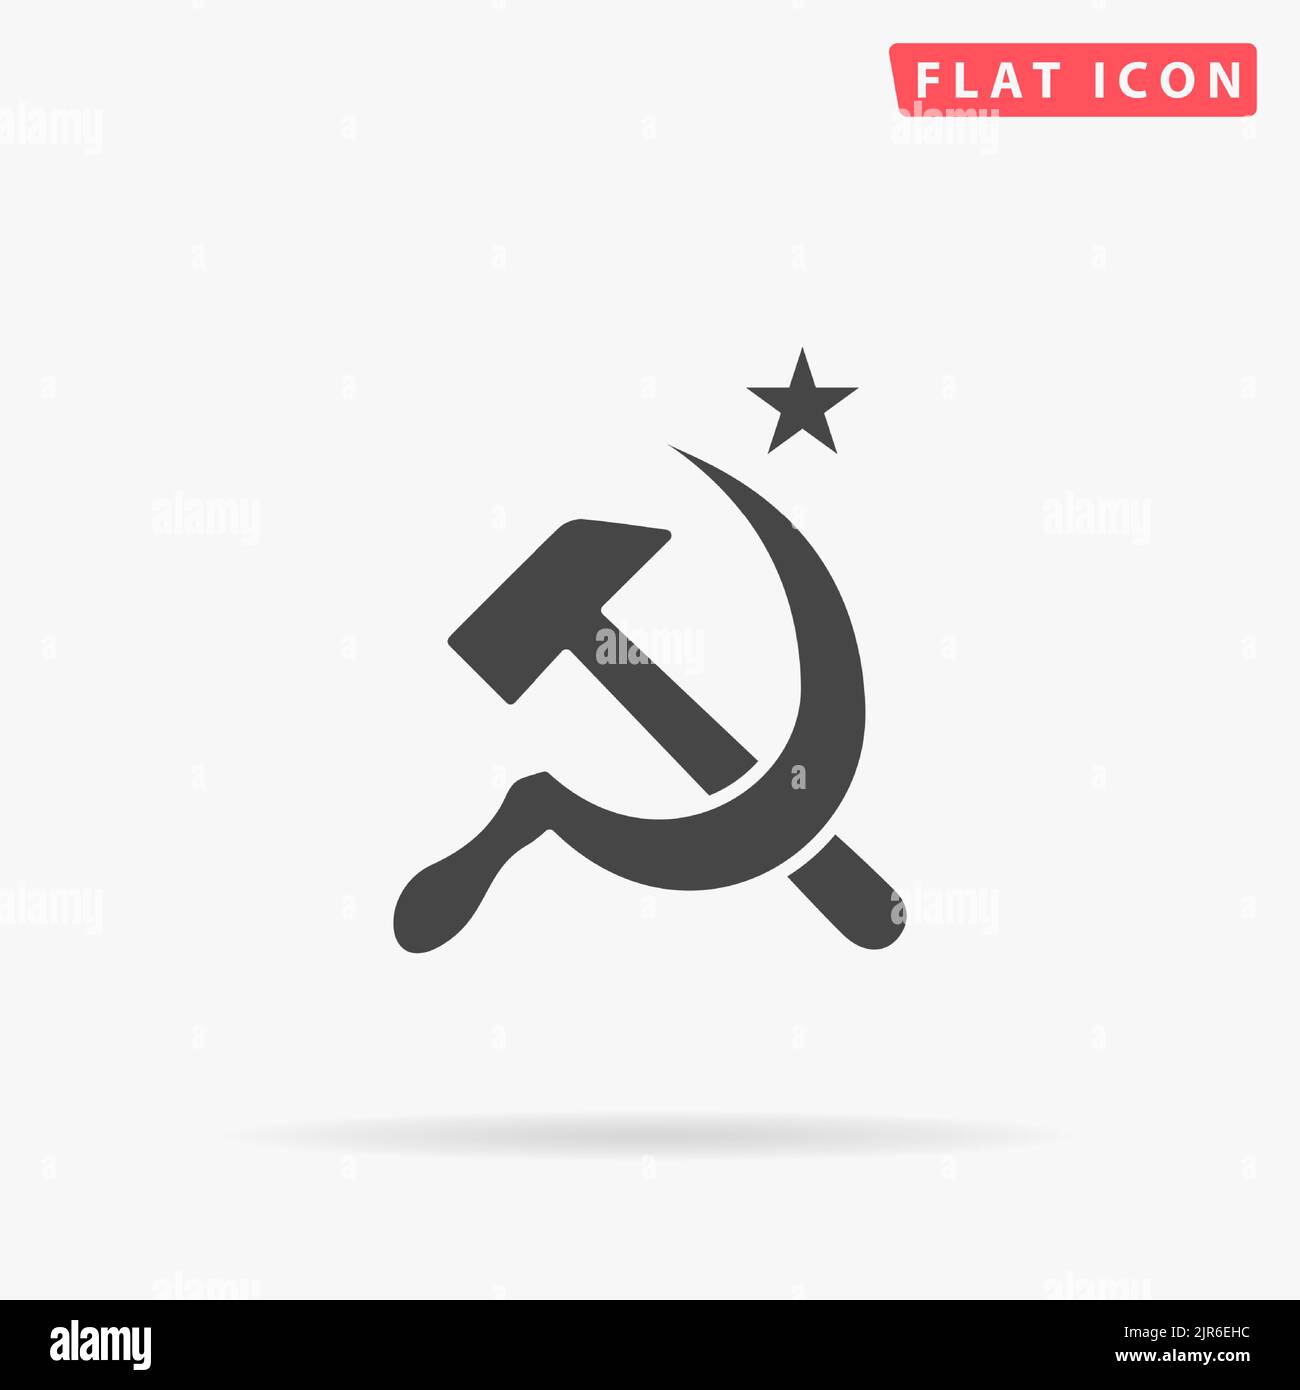 USSR flat vector icon. Hand drawn style design illustrations. Stock Vector